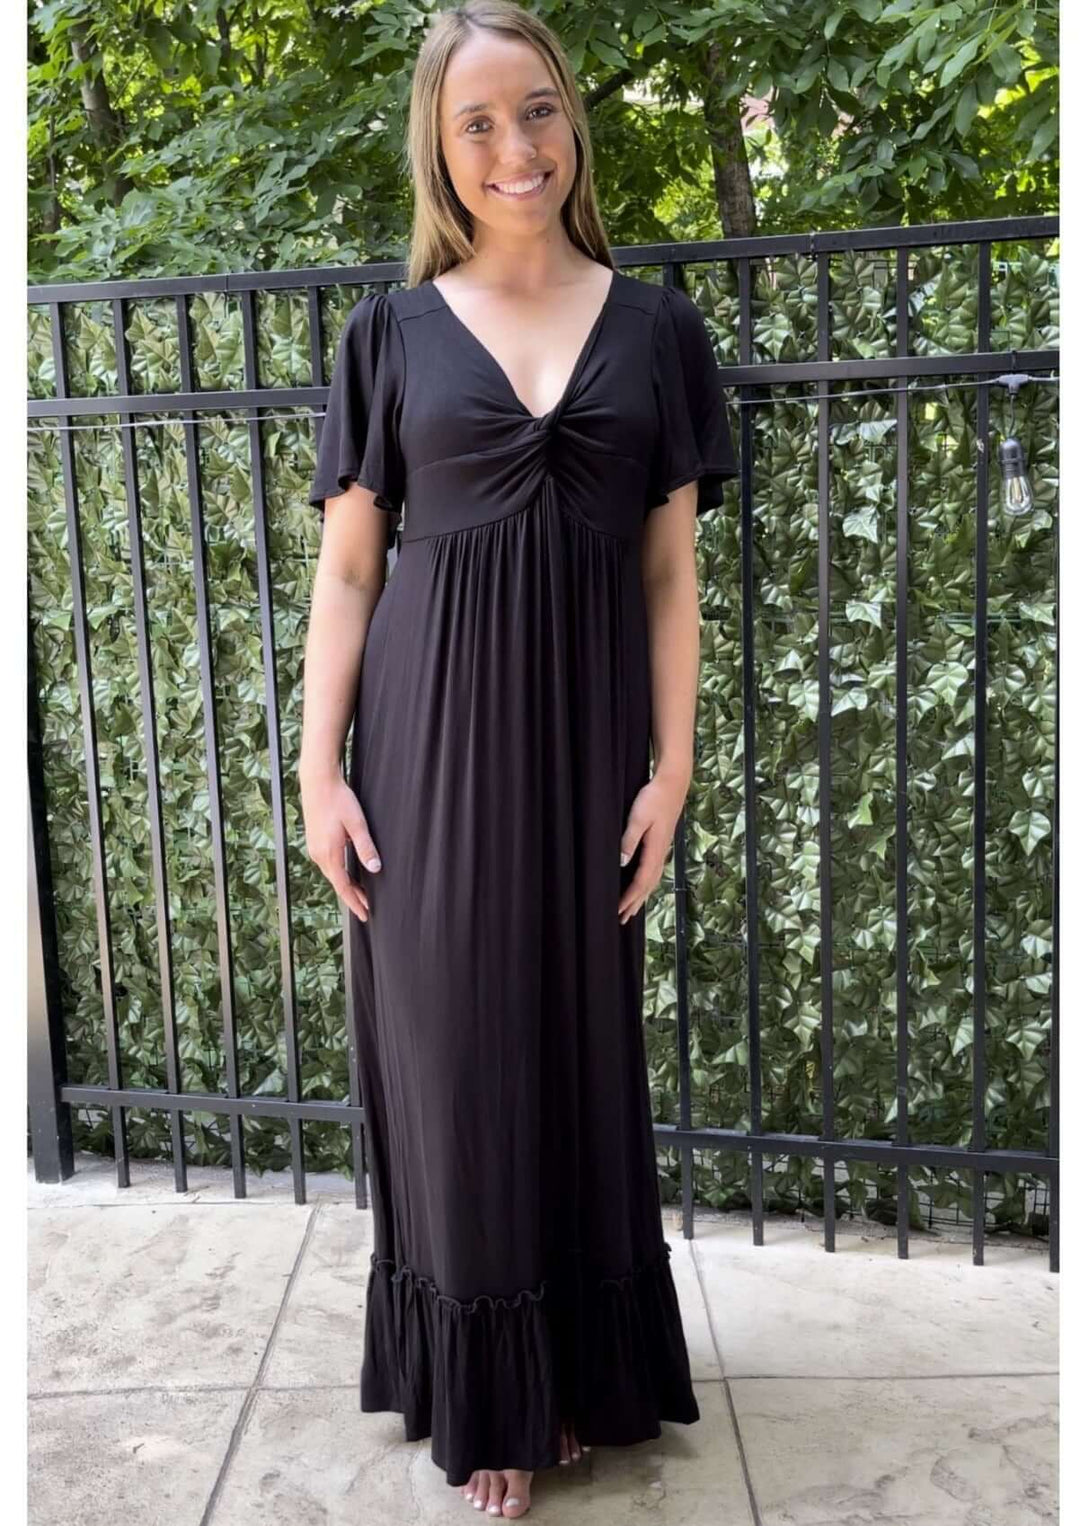 USA Made Ladies Super Soft Black V-Neck Maxi Dress With Short Flutter Sleeves & Front Twist Knot Detail | Classy Cozy Cool Women's Made in America Boutique